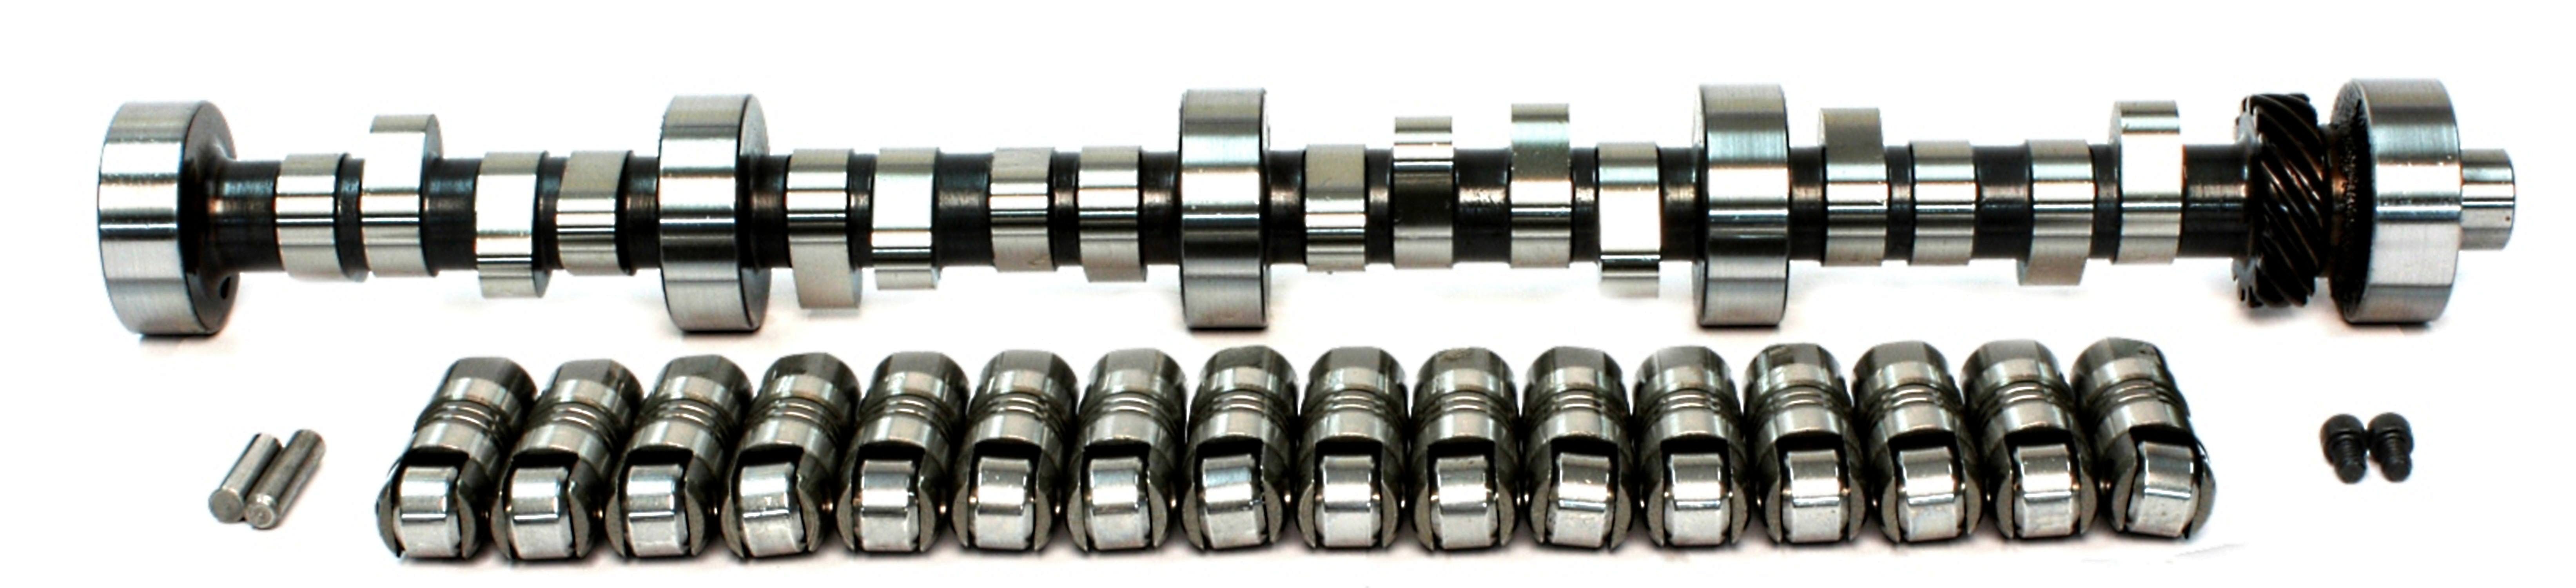 Competition Cams CL32-602-8 BIG MUTHA THUMPR 243/257 HYDRAULIC ROLLER CAM/LIFTER KIT FORD 351C, 351M-400M